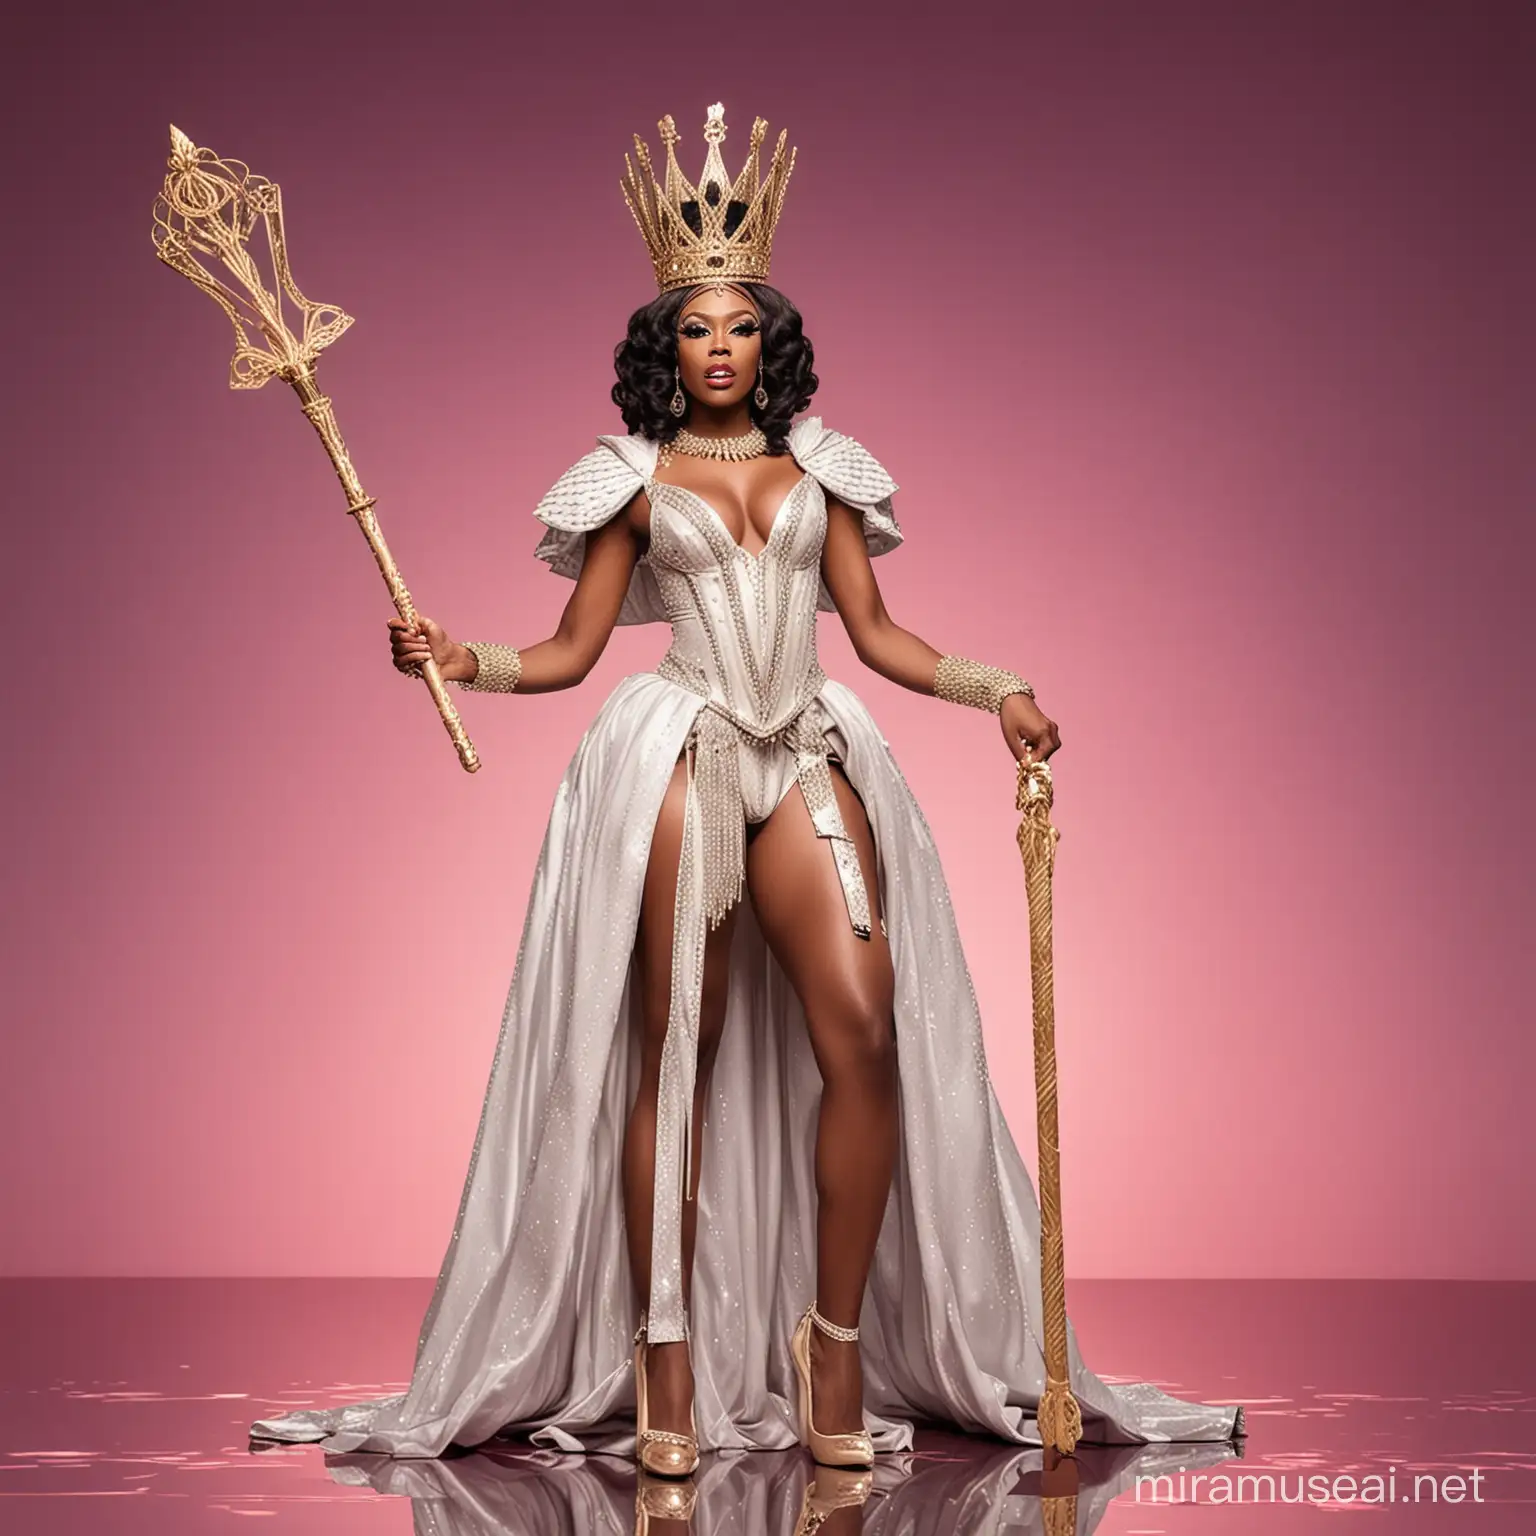 a full body image of a skinny nigerian drag queen walking on the Rupaul's Drag race runway wearing an outfit inspired by the prompt: queen of the world, she is holding a scepter and is wearing a crown